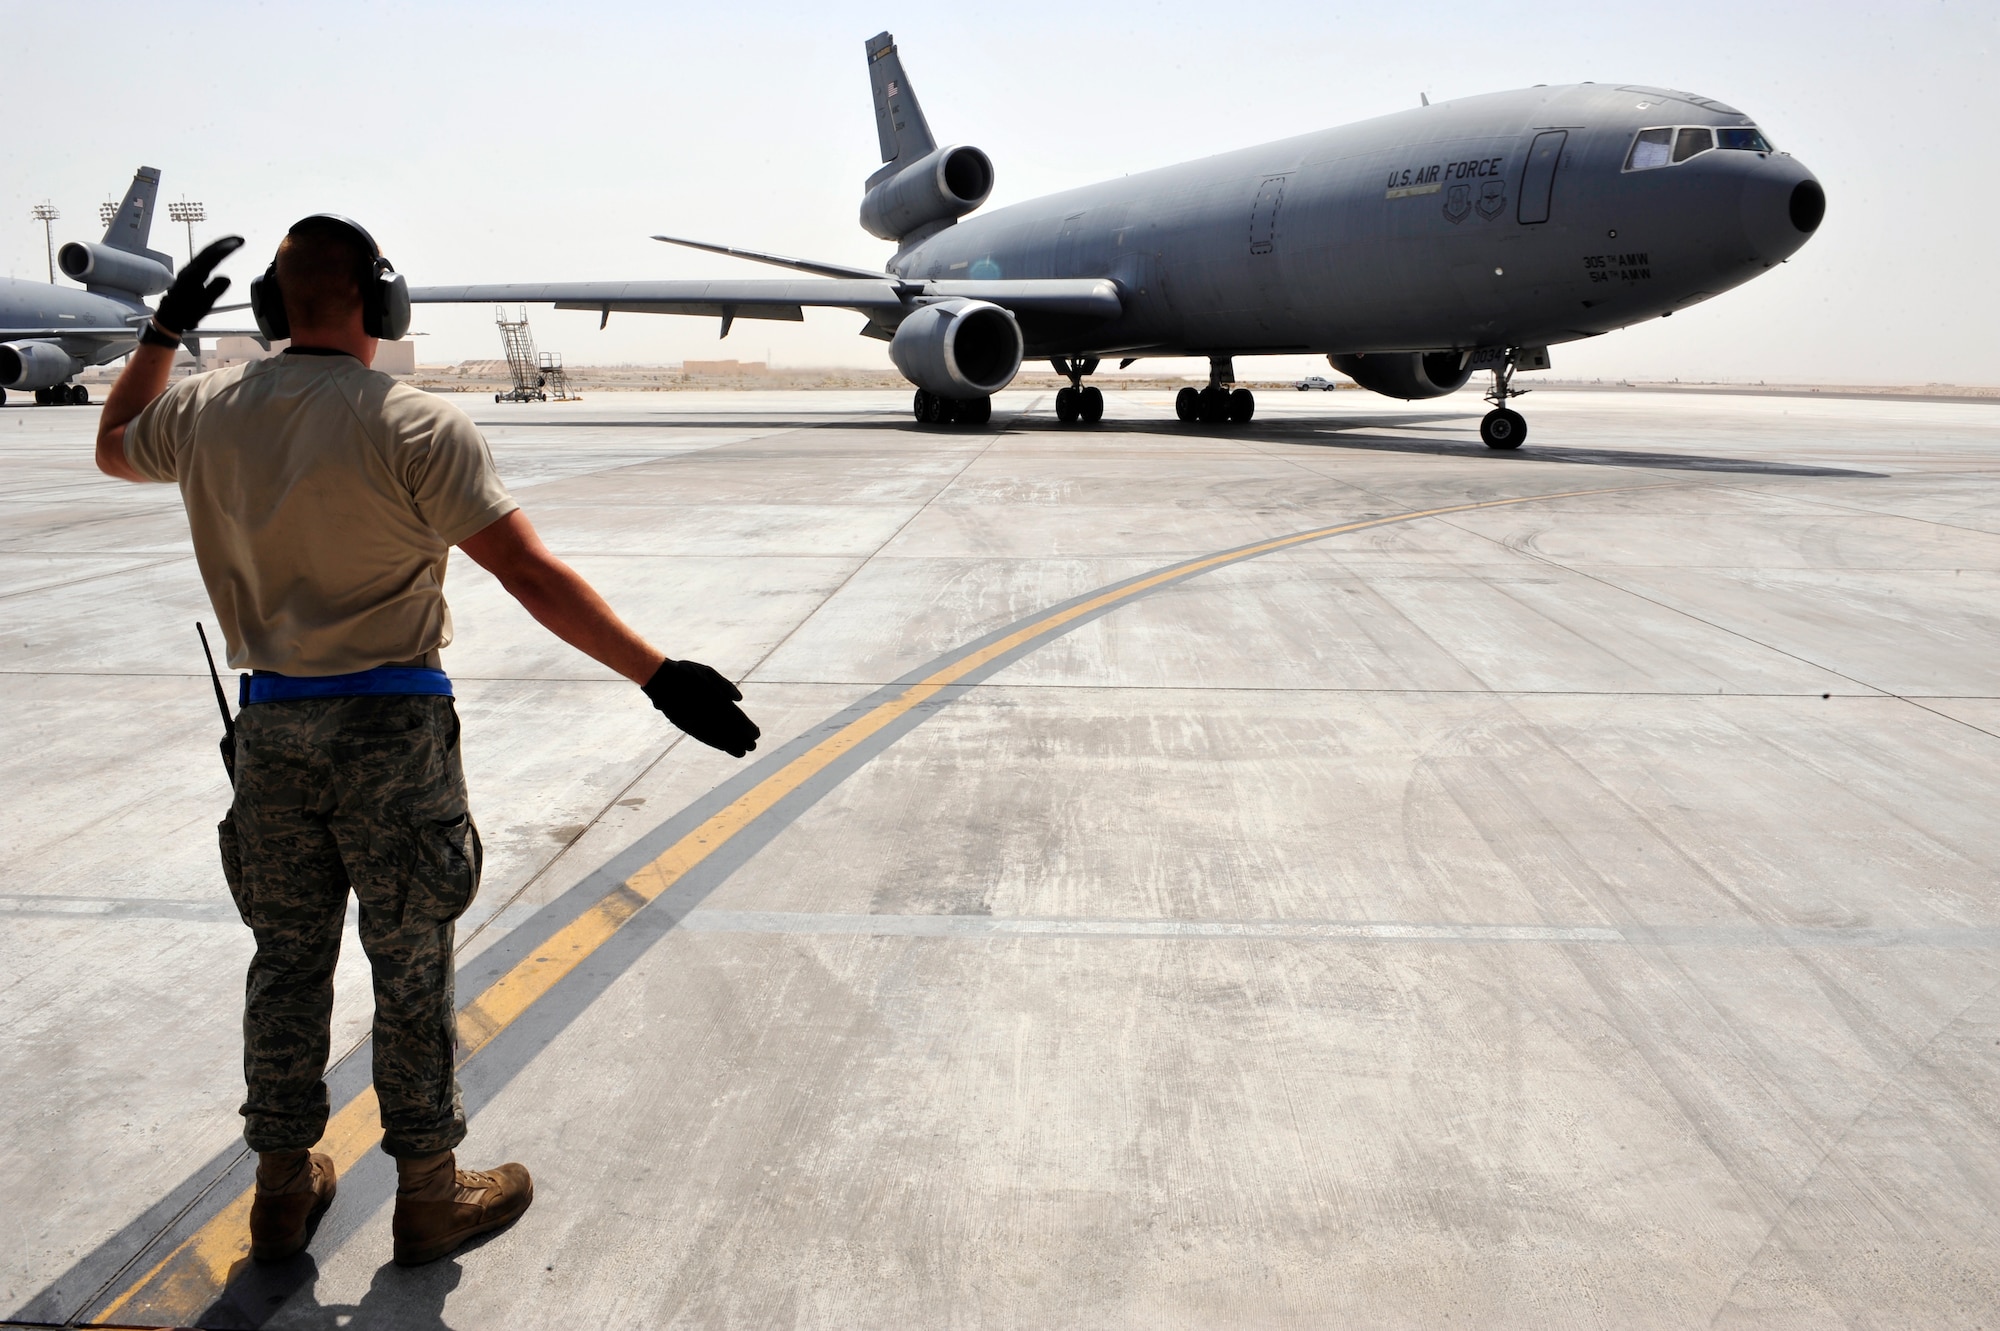 SOUTHWEST ASIA -Senior Airman Shawn Adams, 380th Expeditionary Maintenance
Squadron, marshals out a KC-10 Extender Aug. 29, 2009. Airman Adams is
deployed from Travis Air Force Base, Calif., and grew up in Wichita Falls,
Texas. (U.S. Air Force photo/Tech. Sgt. Charles Larkin Sr)